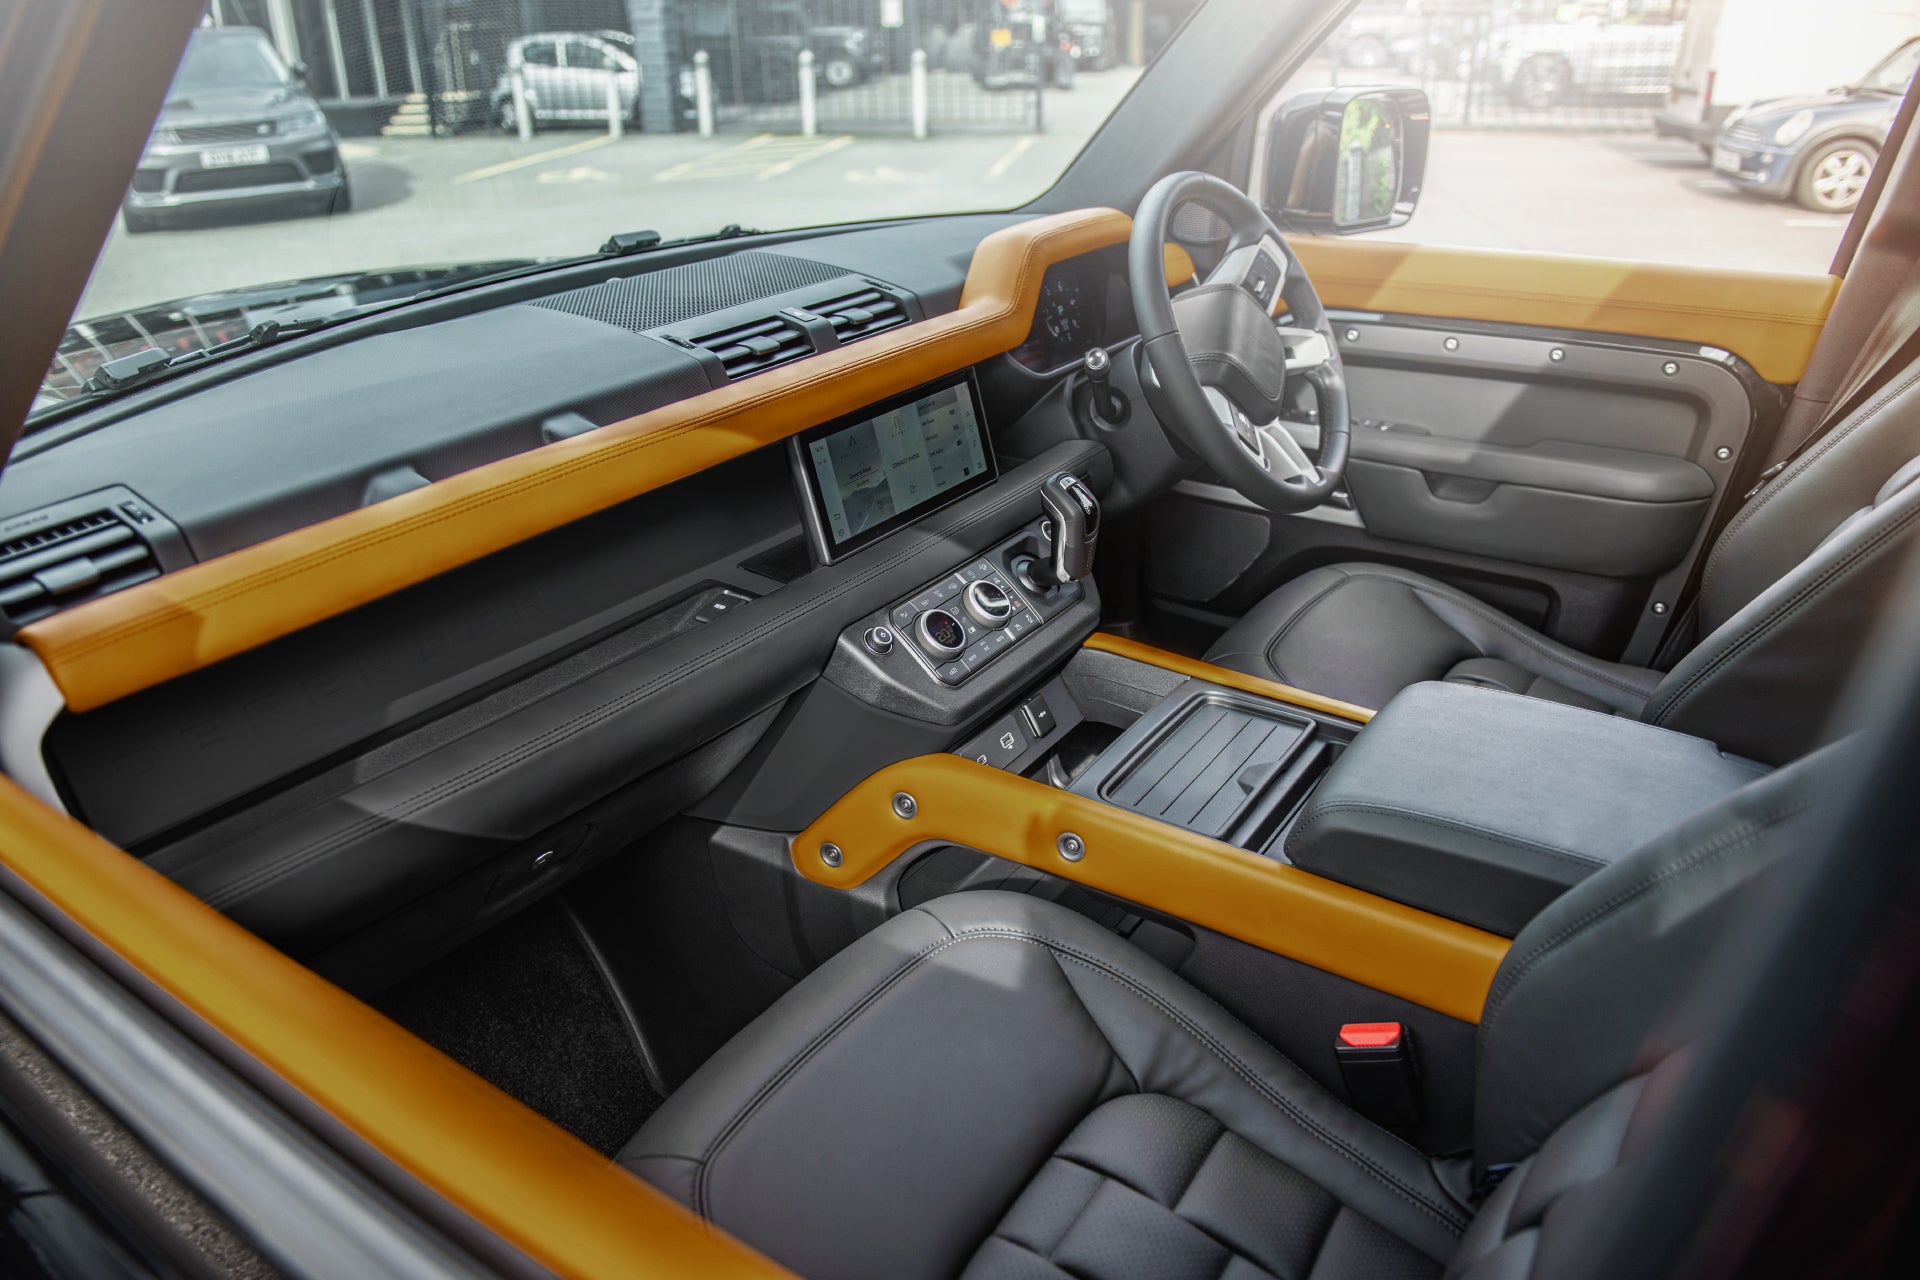 Land Rover Defender 110 (2020-Present) Environment 2: Upper and Lower Interior